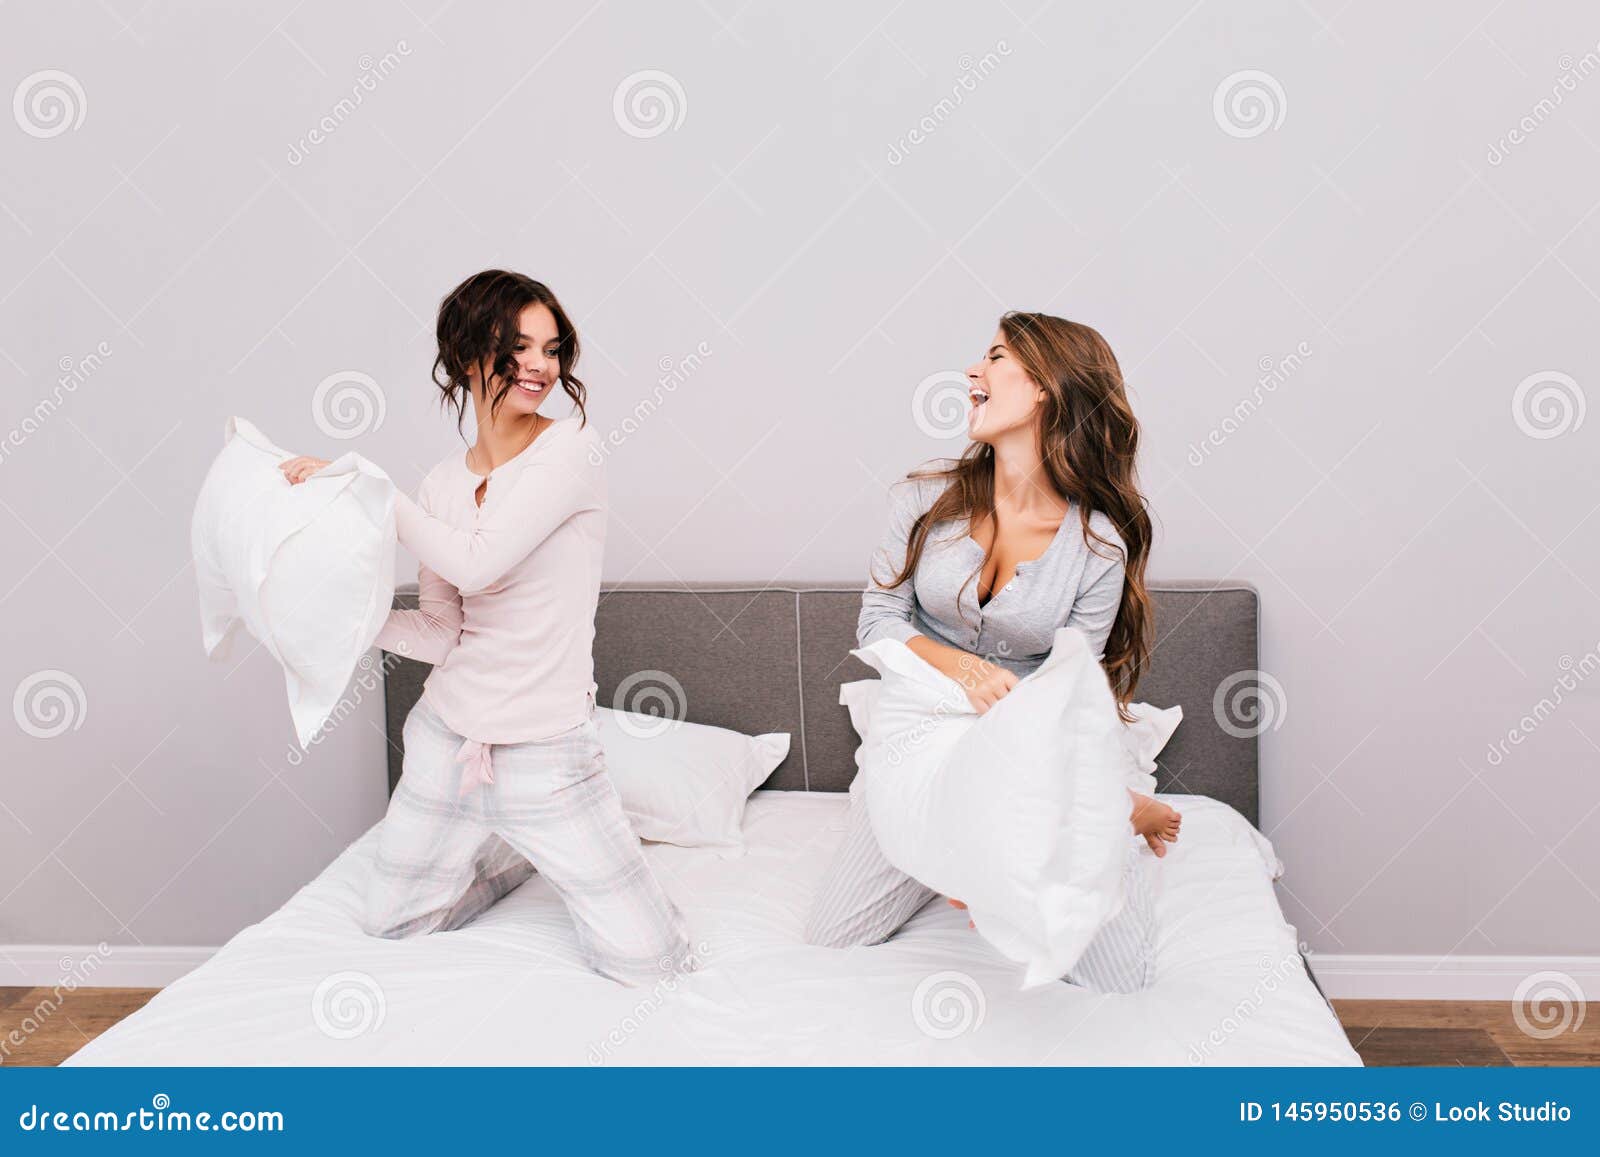 Two Pretty Girls In Pajamas Having Pillow Fight On Bed Stock Photo